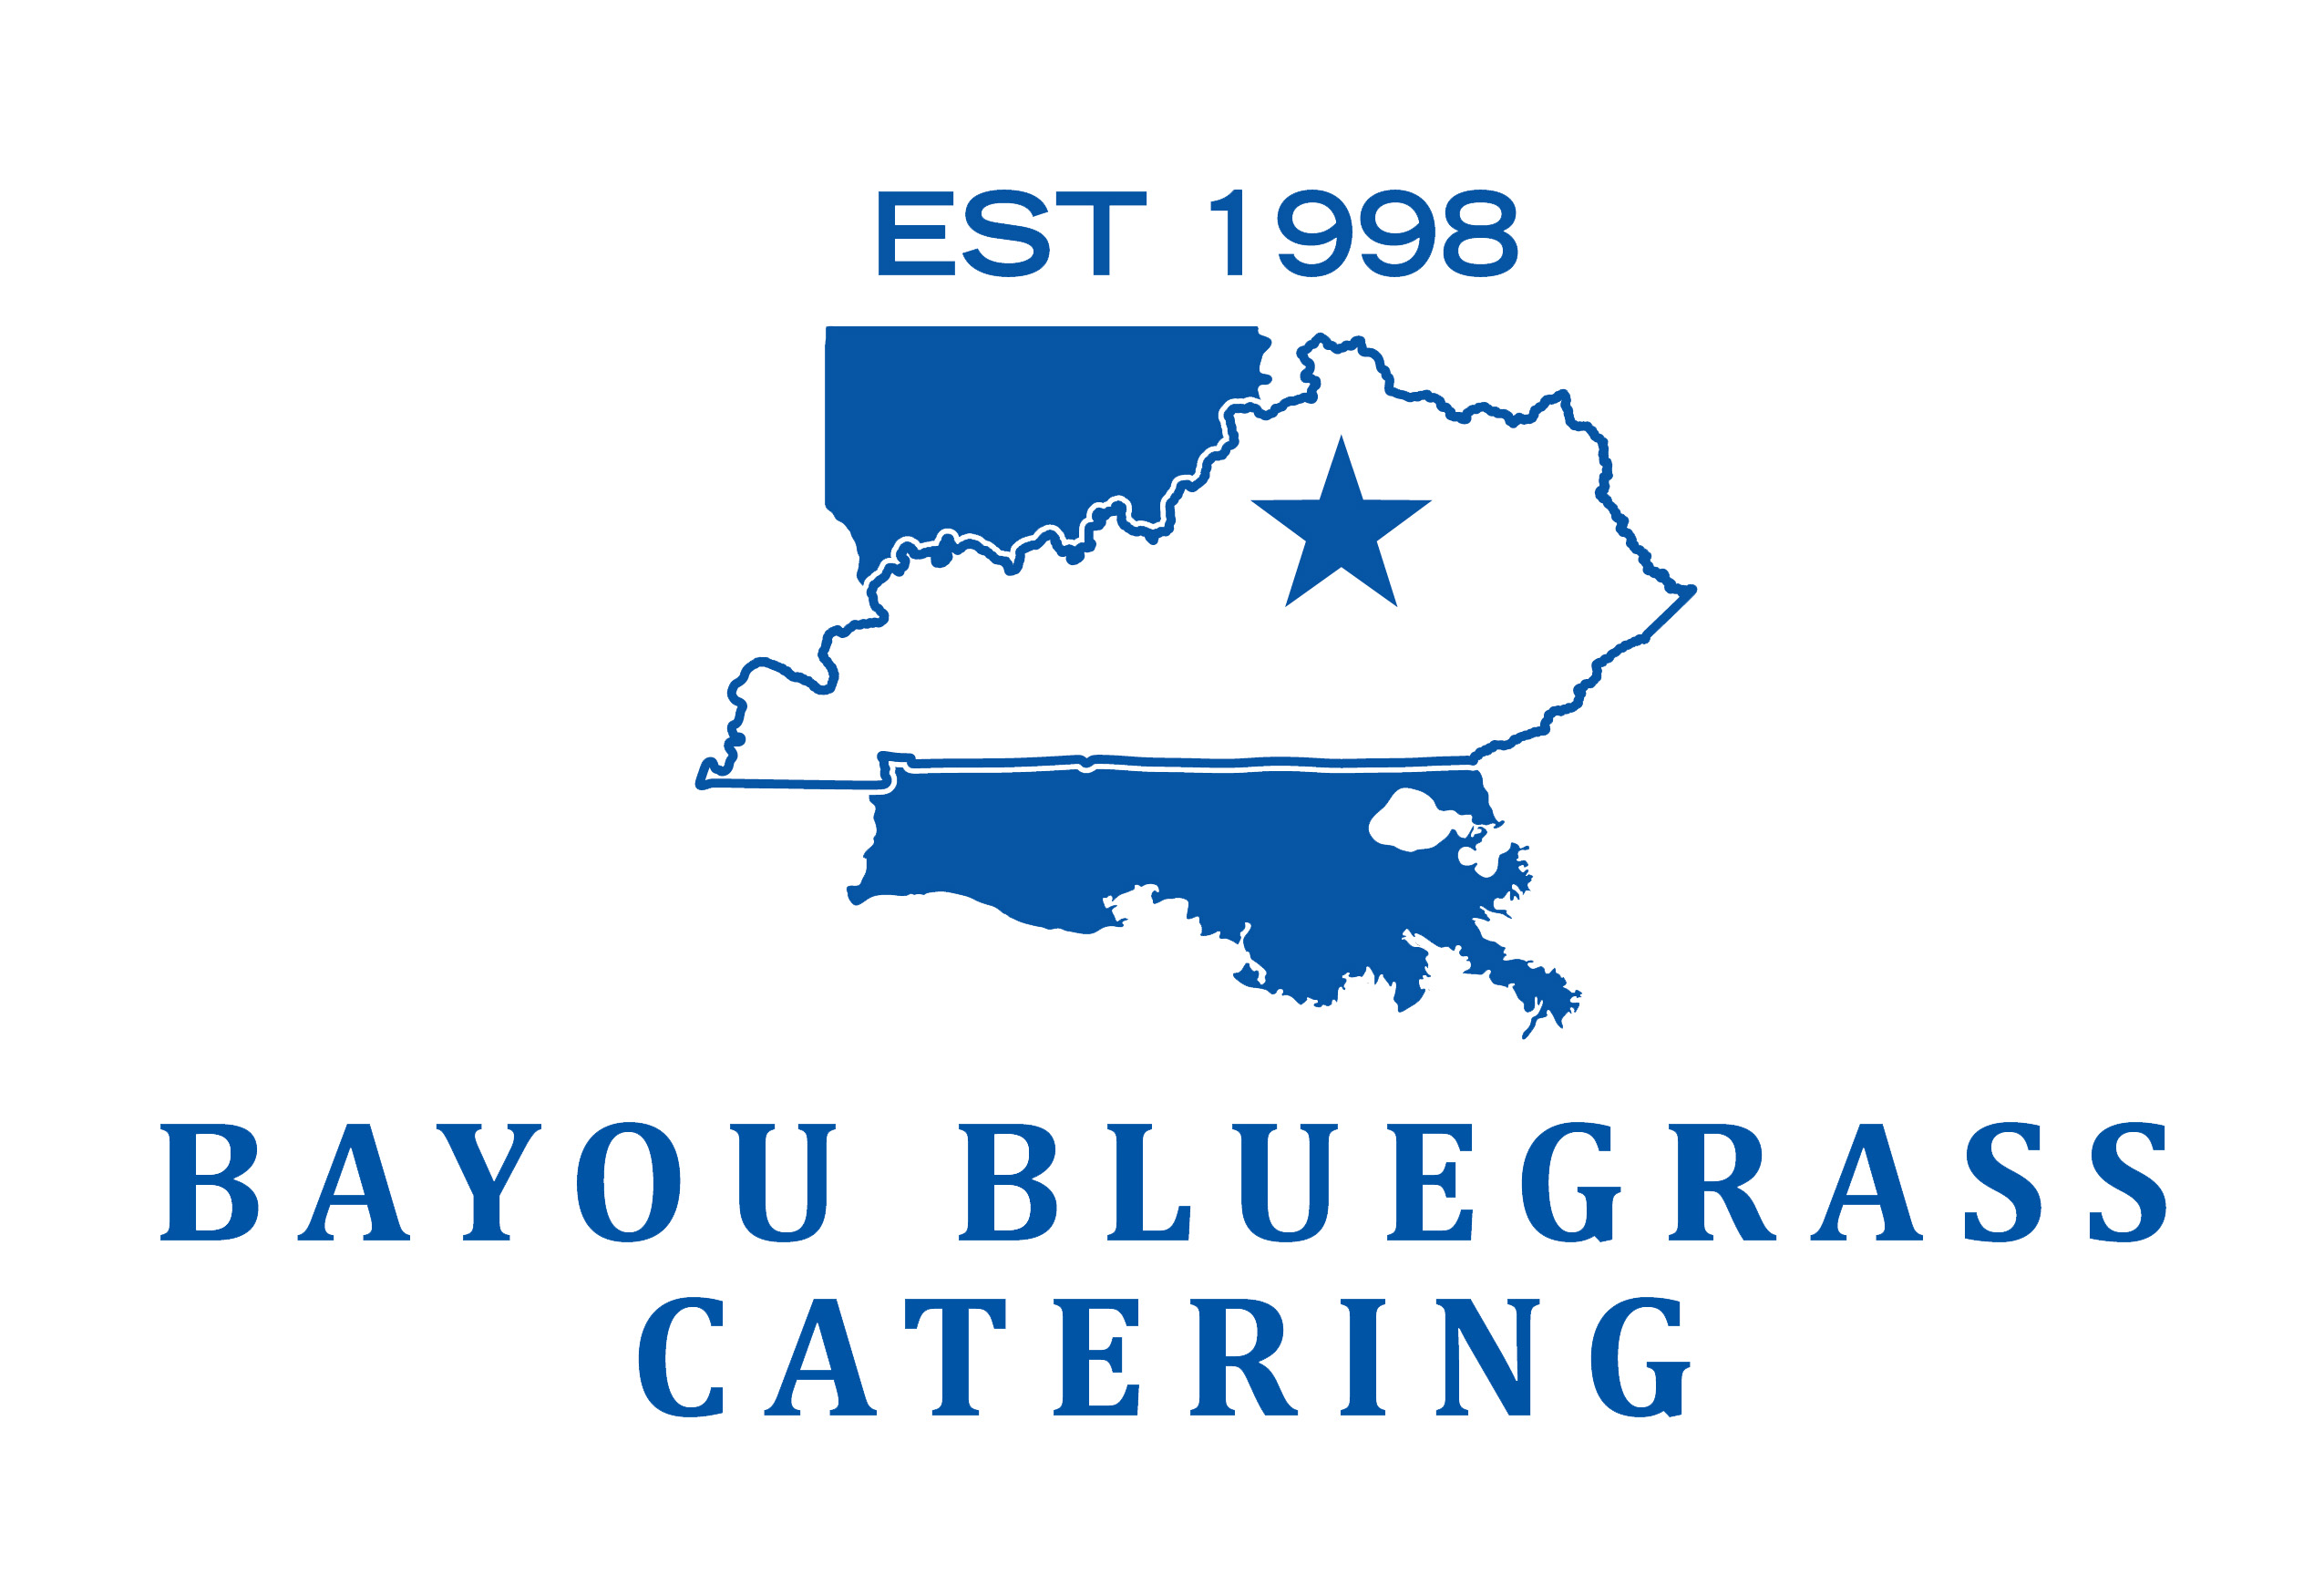 Bayou Bluegrass Catering Curbside